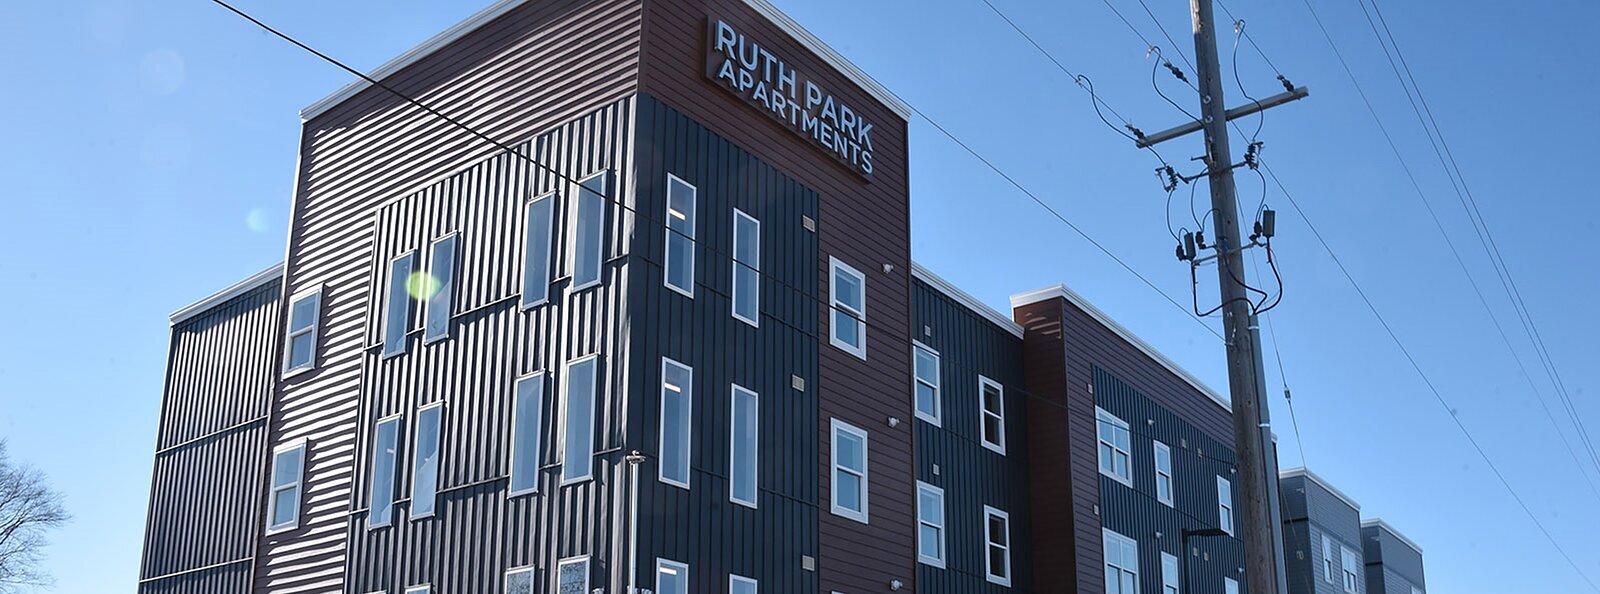 Ruth Park Apartments in Traverse City will offer 58 affordable apartments.